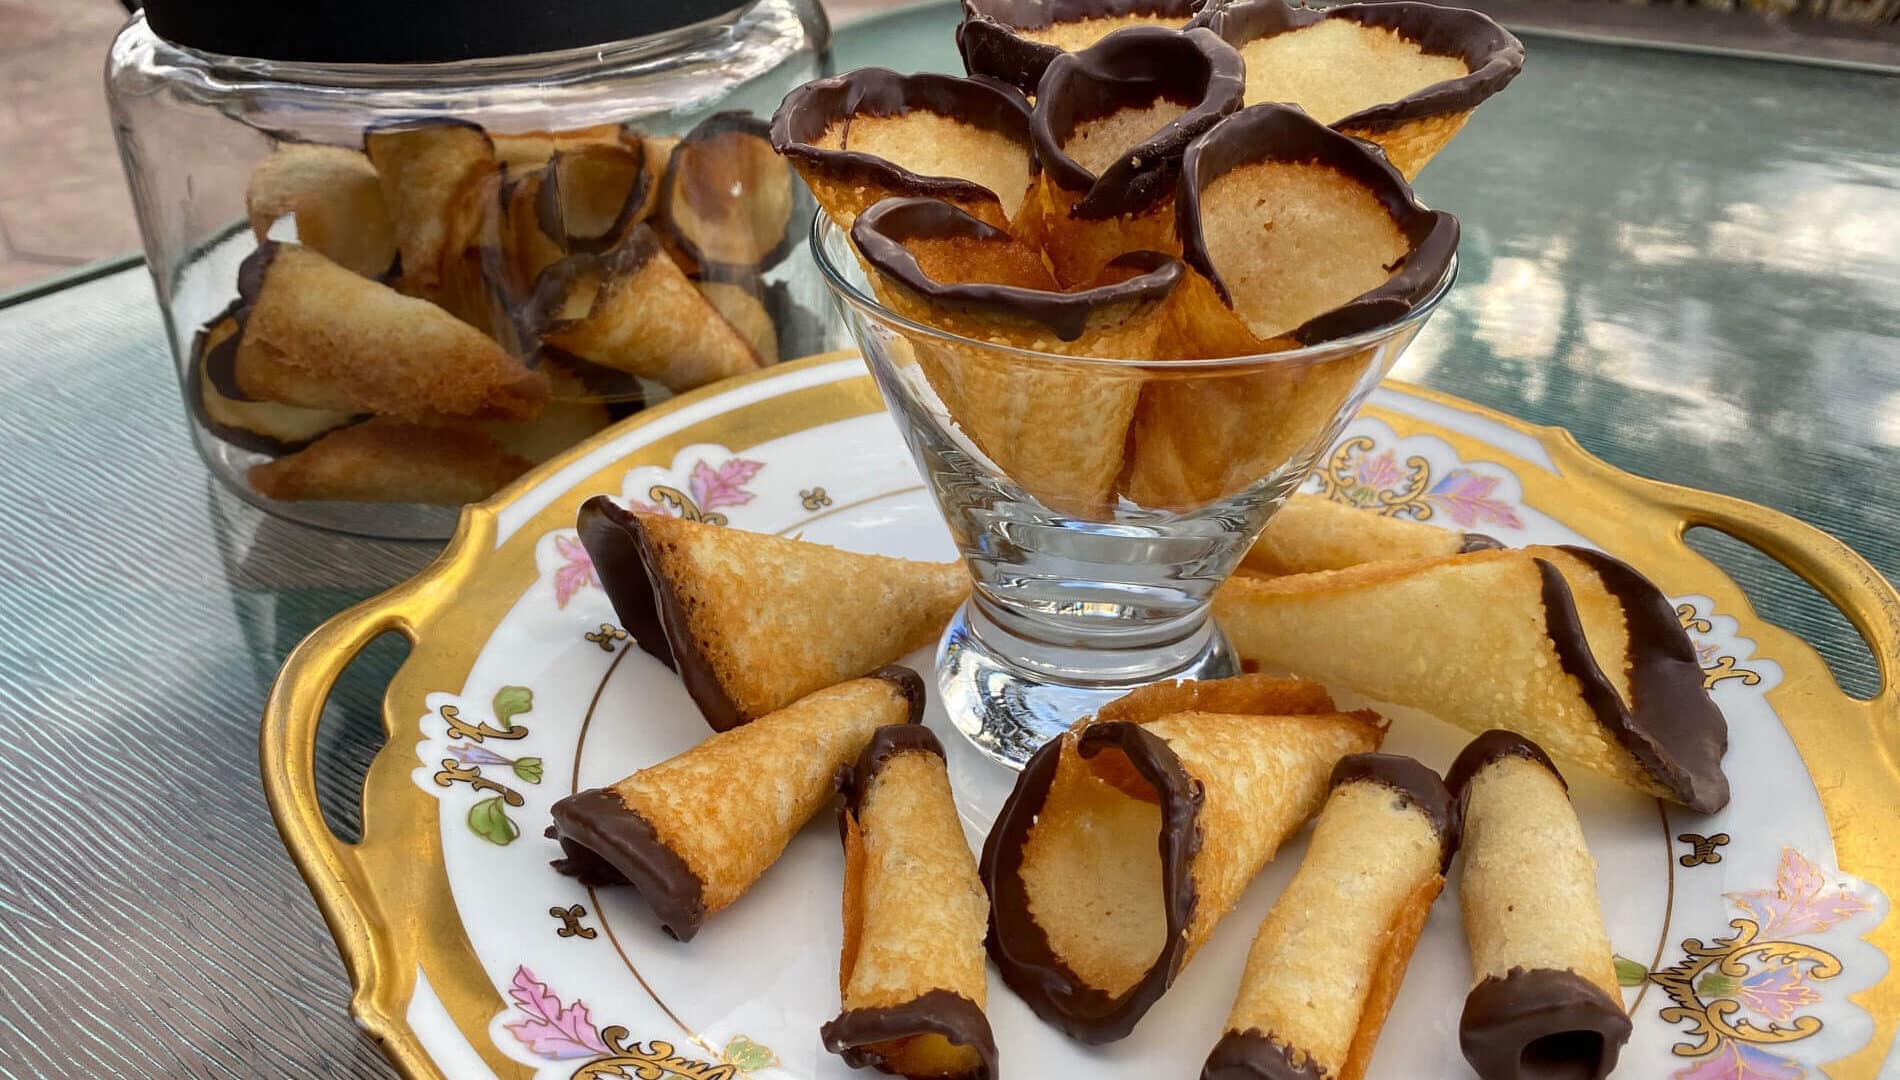 Cone shaped golden cookies in a martini glass and on a plate with the edges dipped in chocolate